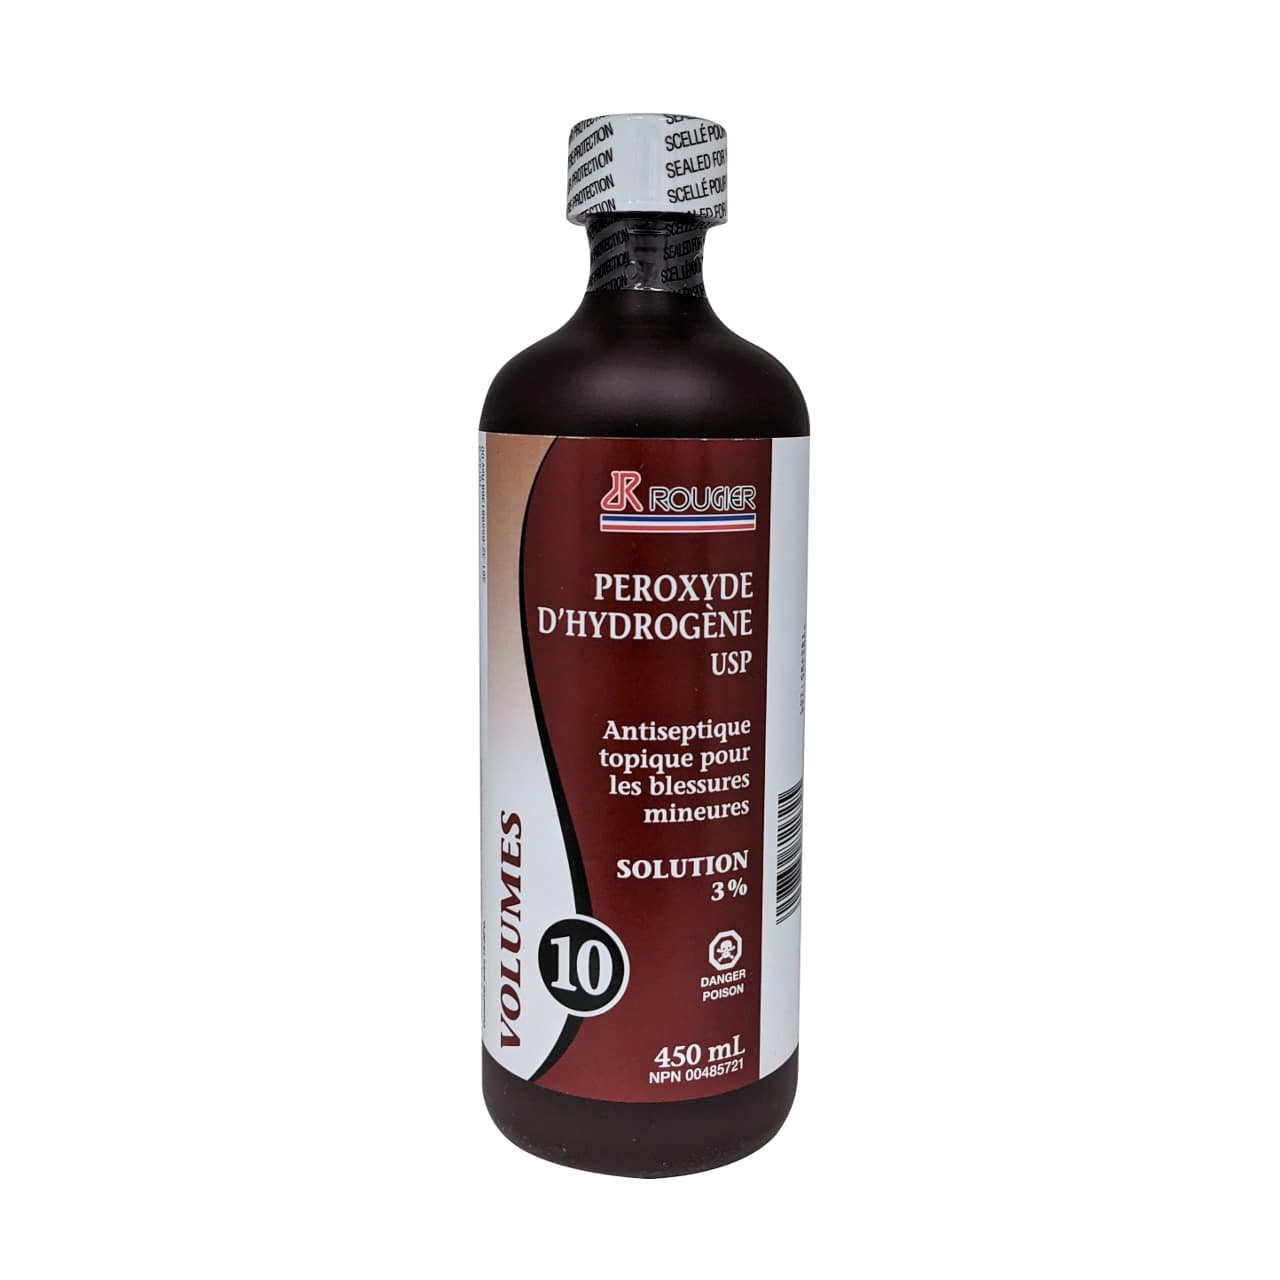 Product label for Rougier Pharma Hydrogen Peroxide USP 3% Solution in French